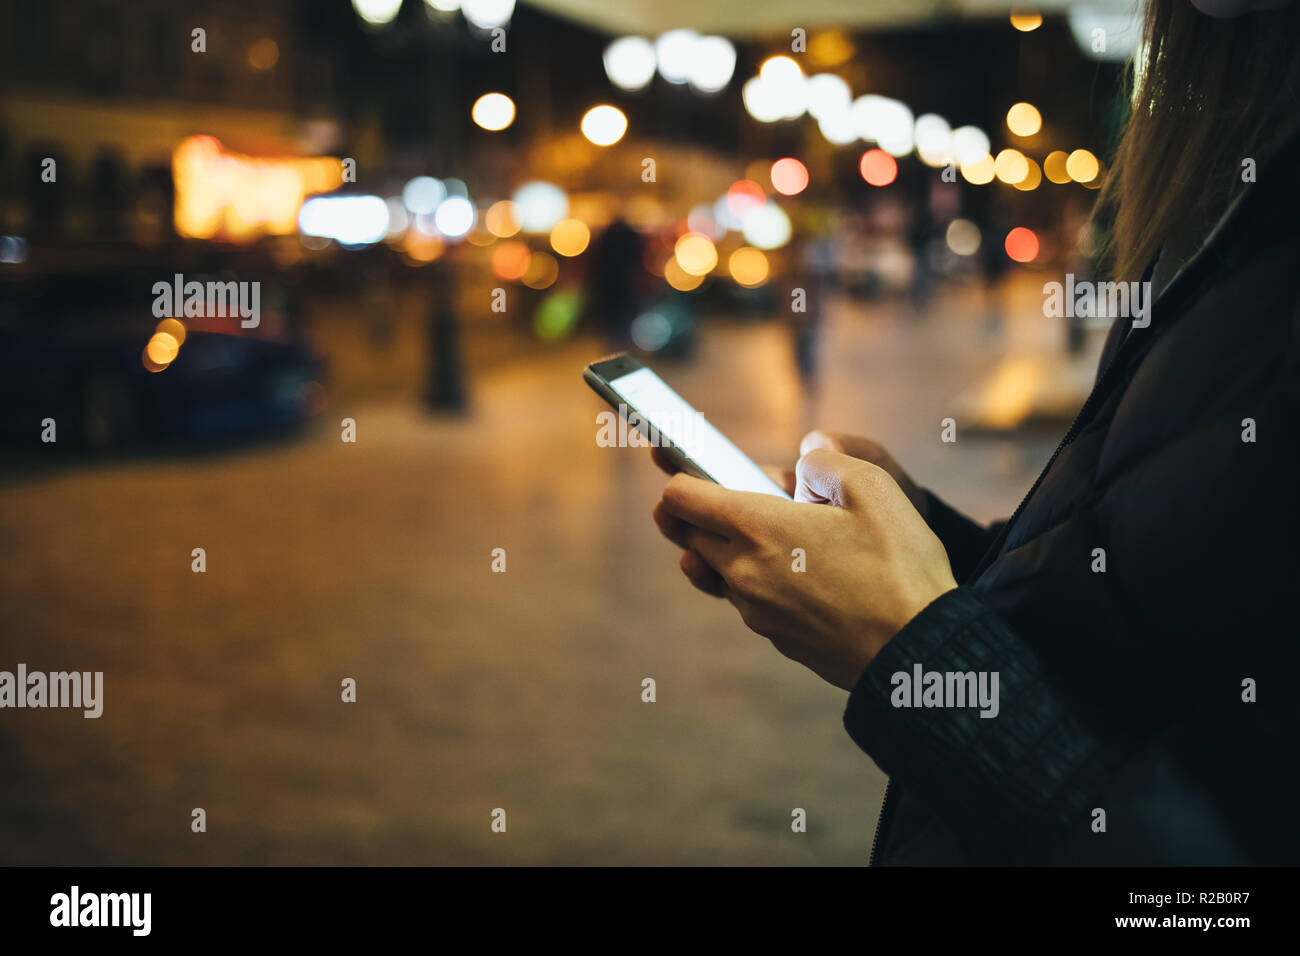 Close-up woman's hands using mobile phone with glowing screen on street, lights of night city on background. Stock Photo